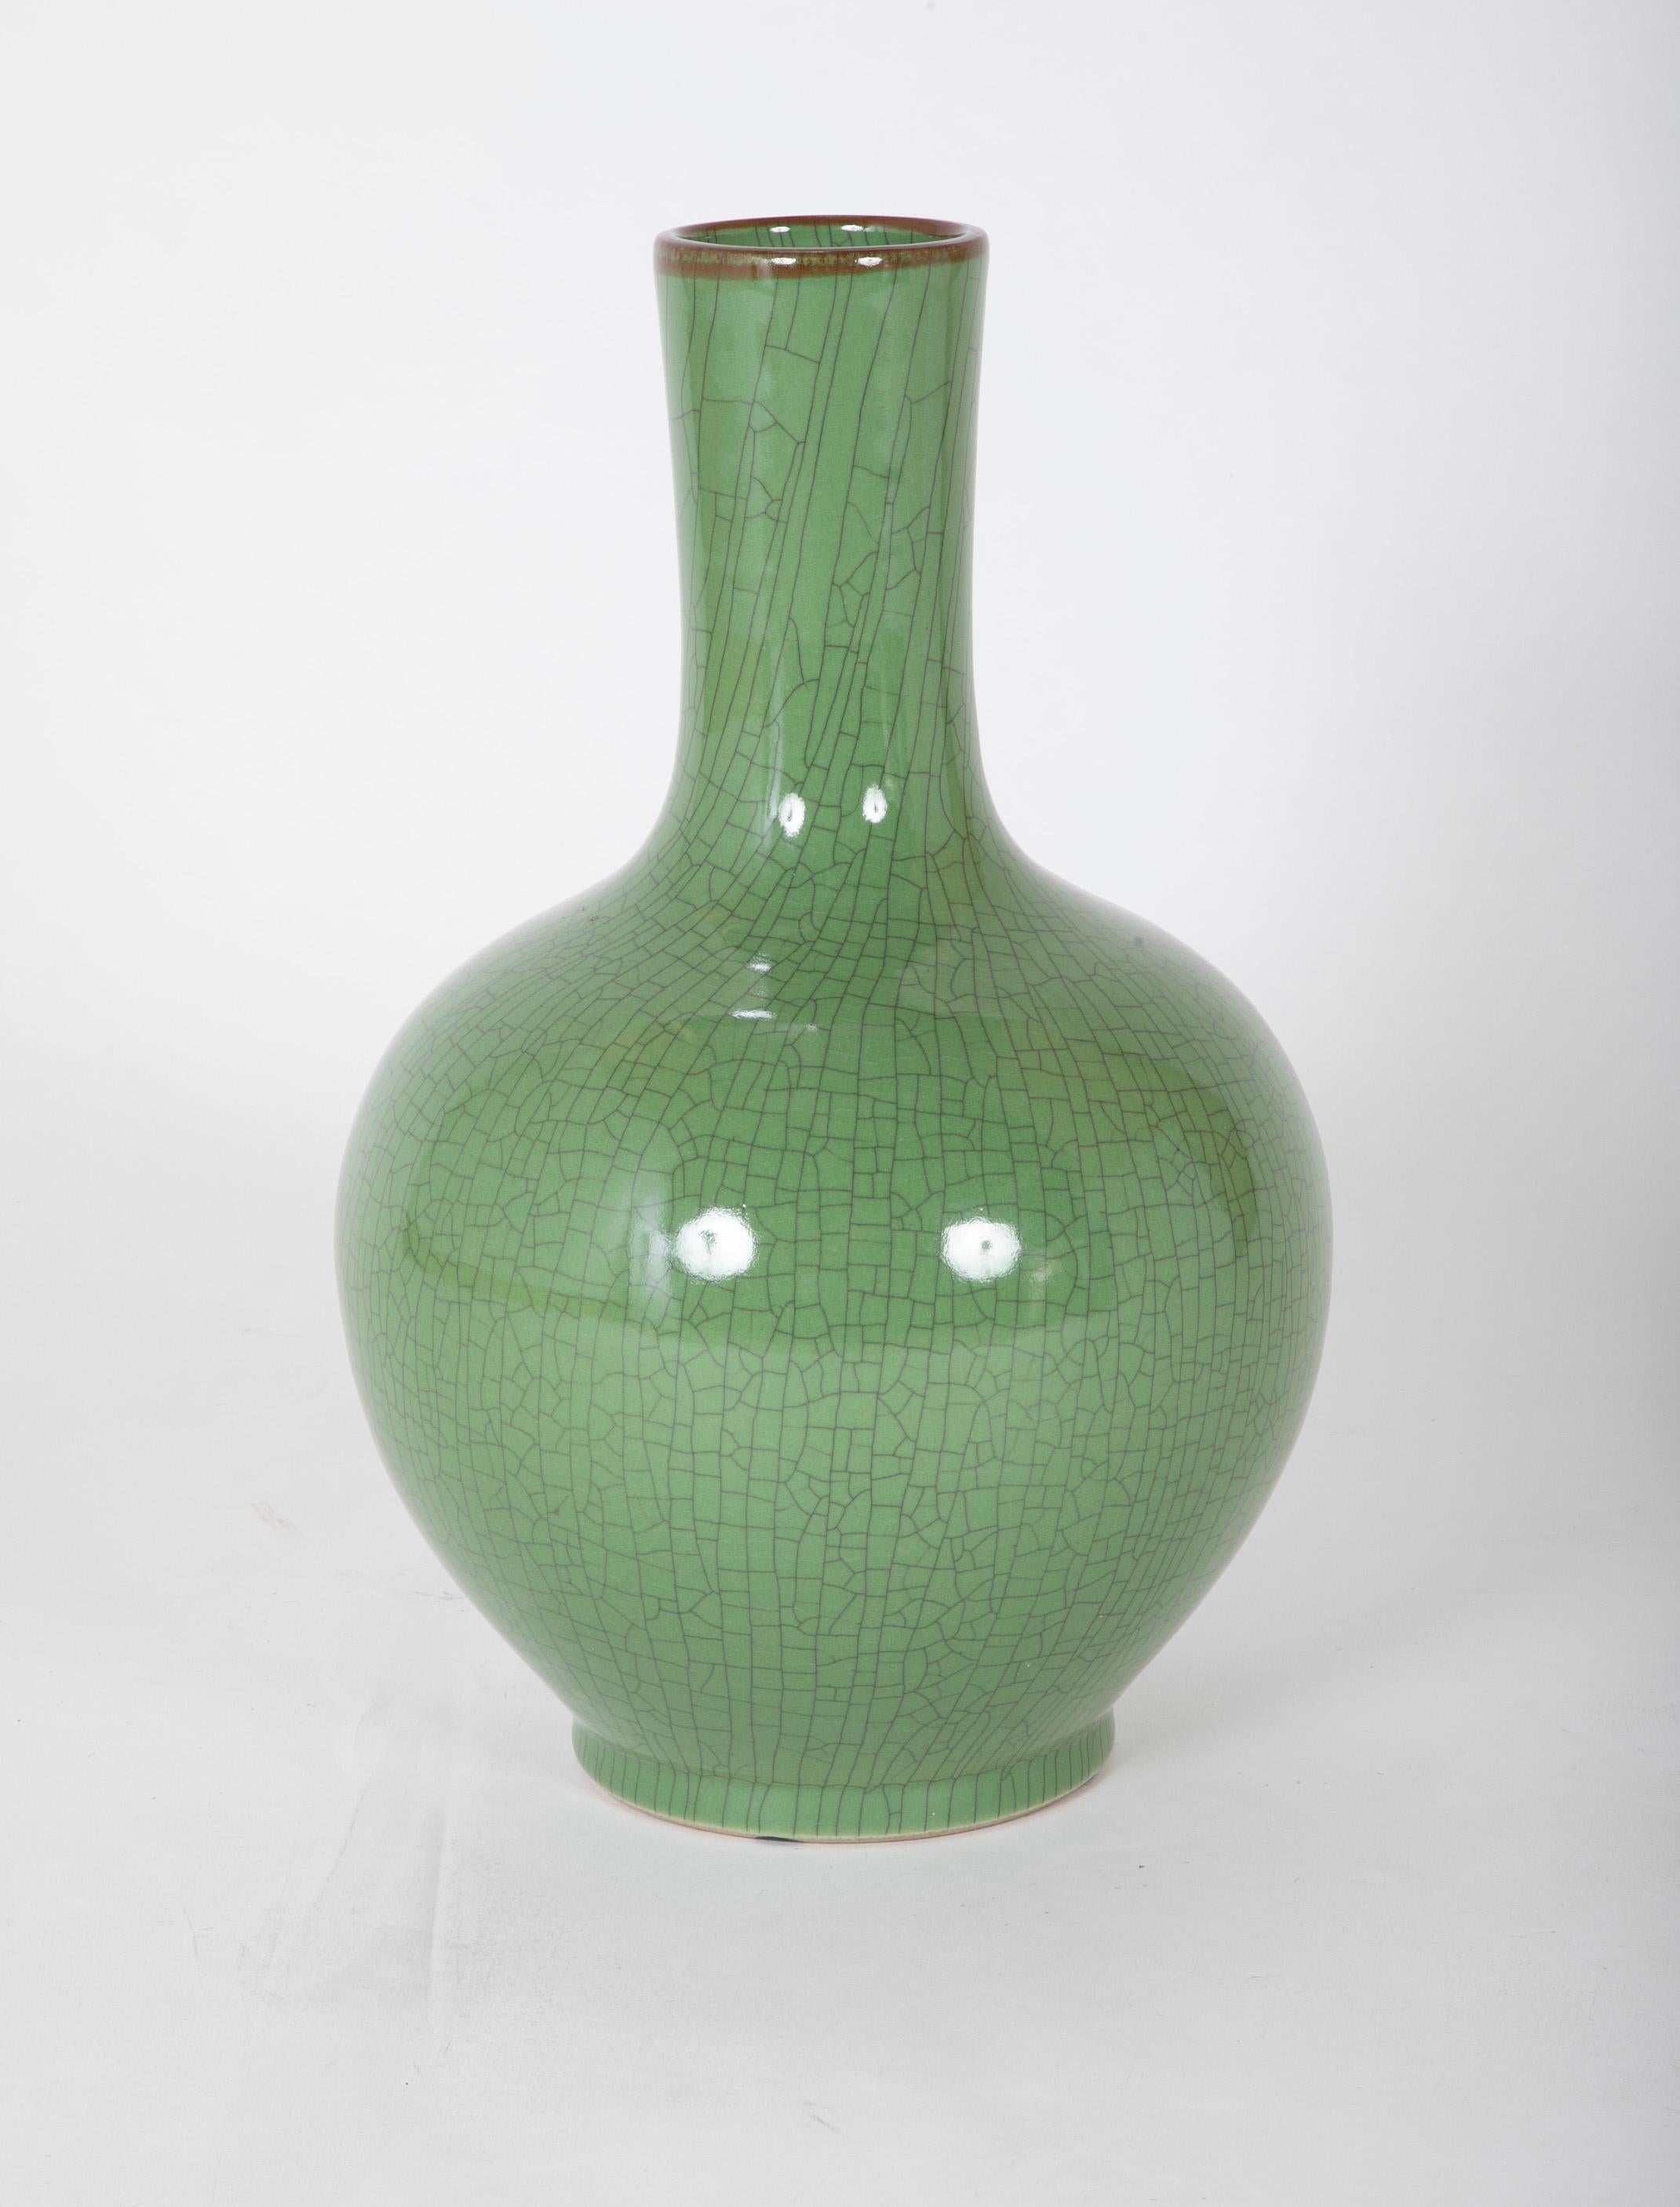 A Chinese vase of impressive size, apple green glaze with wonderful crazed surface, mid 20th century, signature on the bottom. 
19.5 inches high 12 wide and deep.